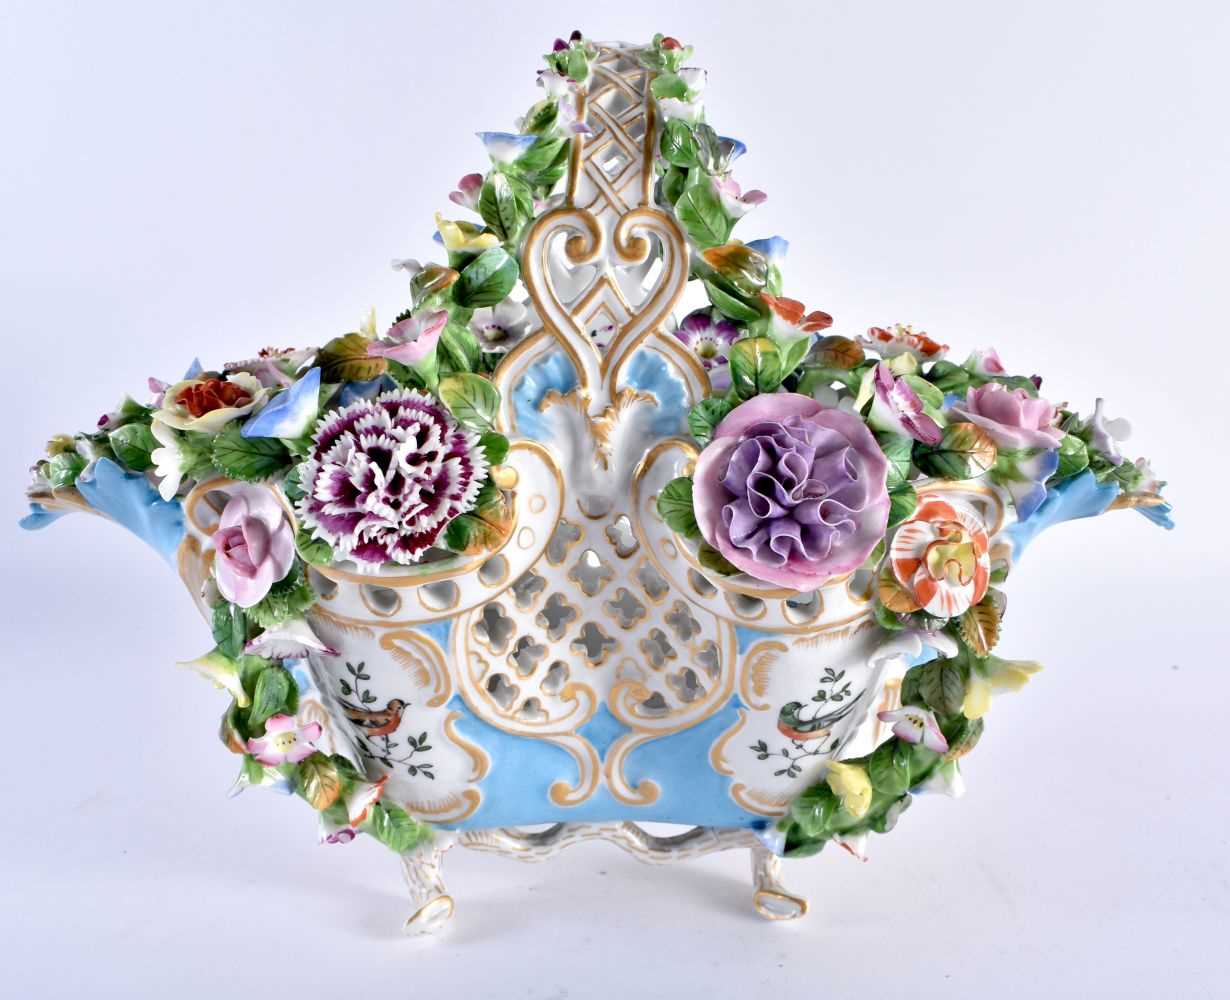 Mid 19th century beautiful English porcelain basket the pierced sides and over handle painted in